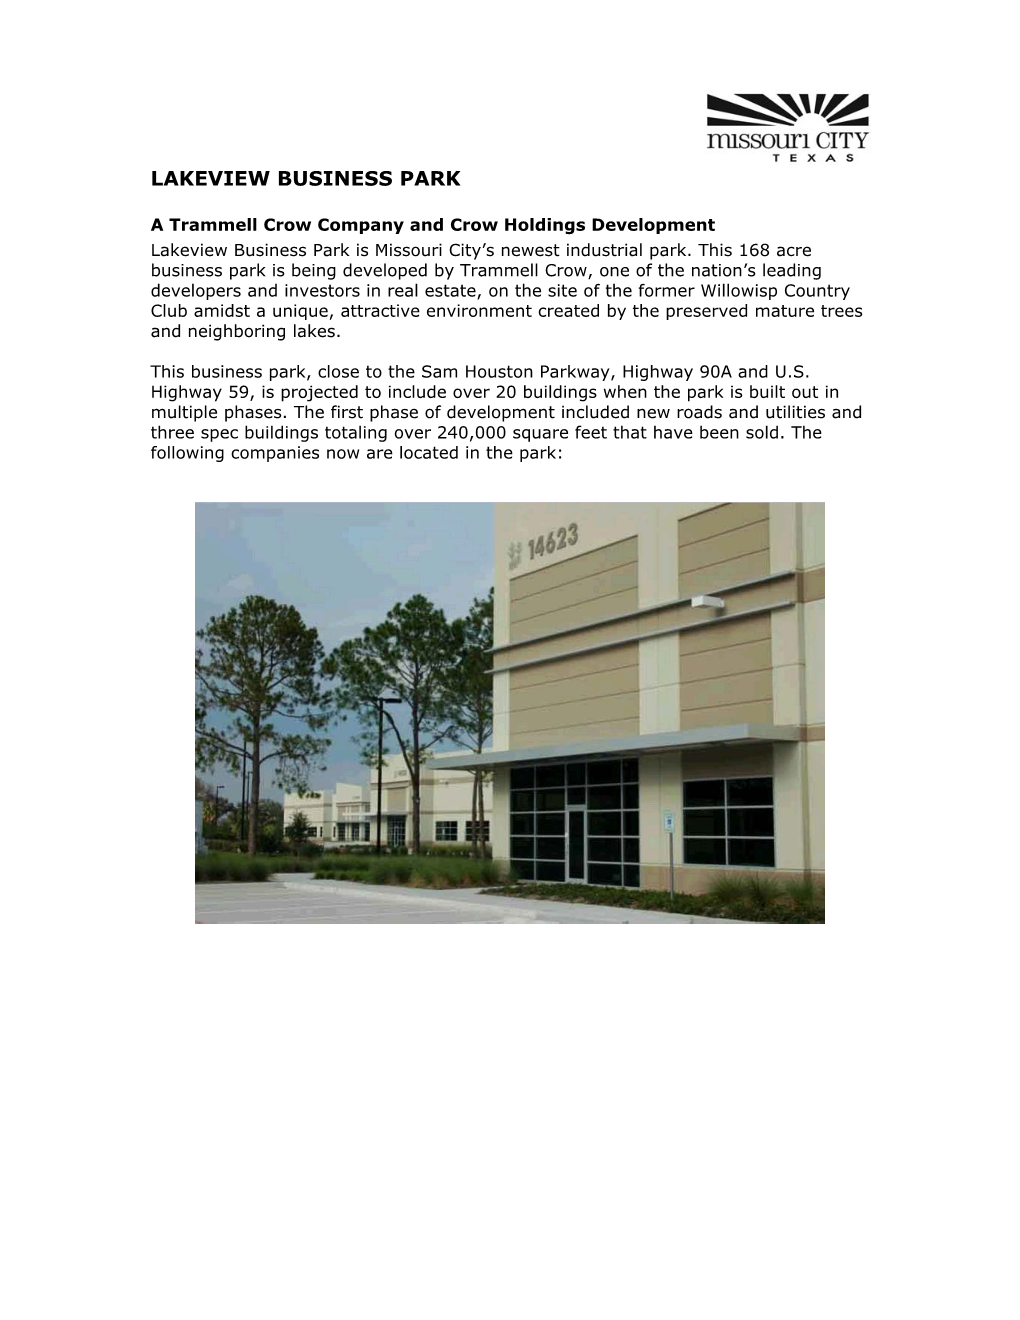 Lakeview Business Park